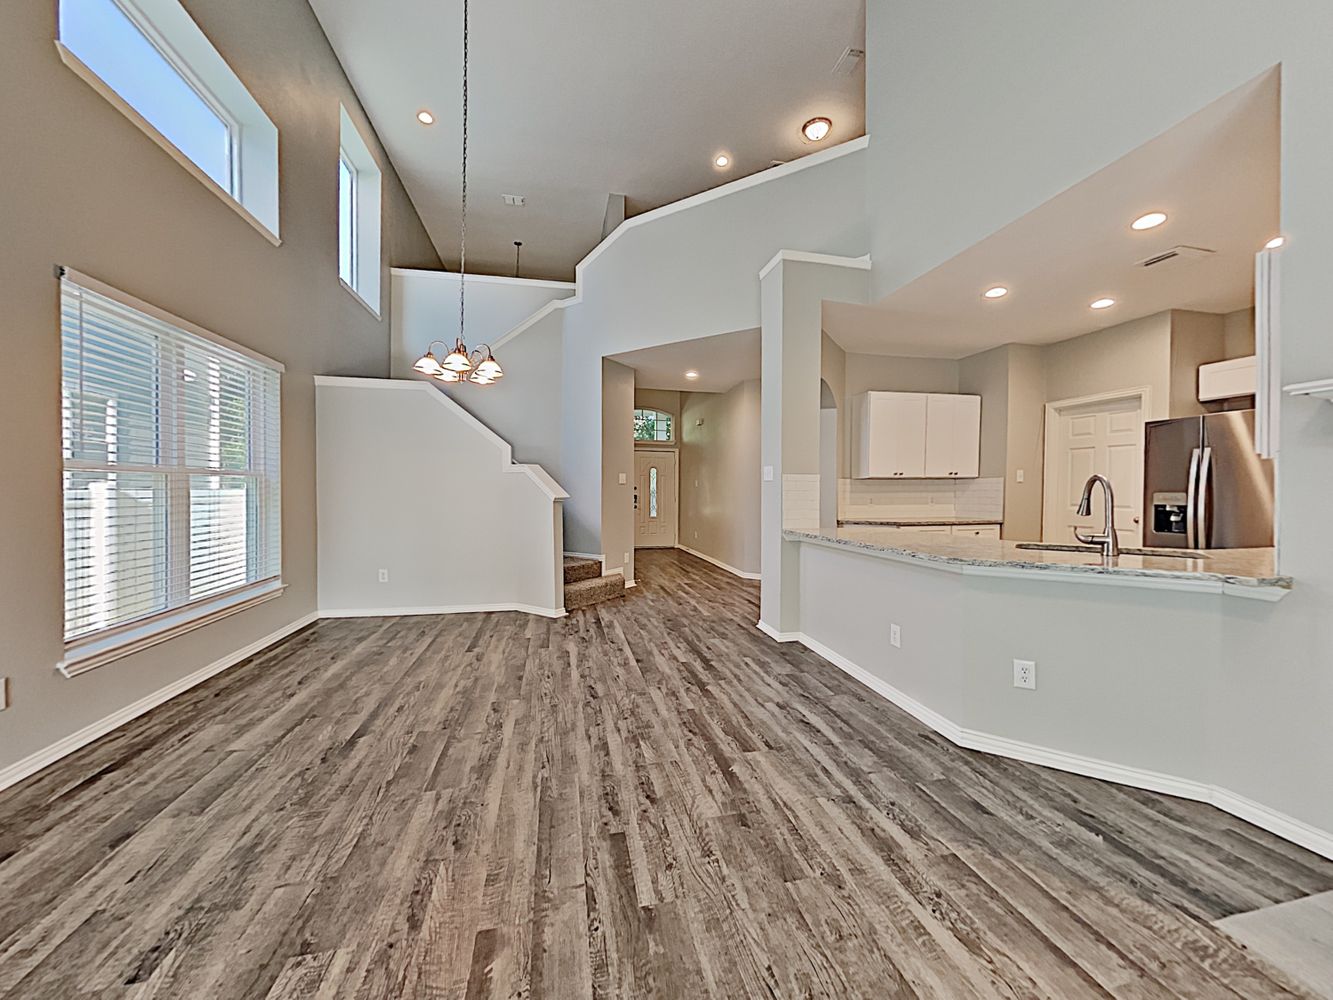 Spacious family room with luxury vinyl plank flooring at Invitation Homes Dallas.